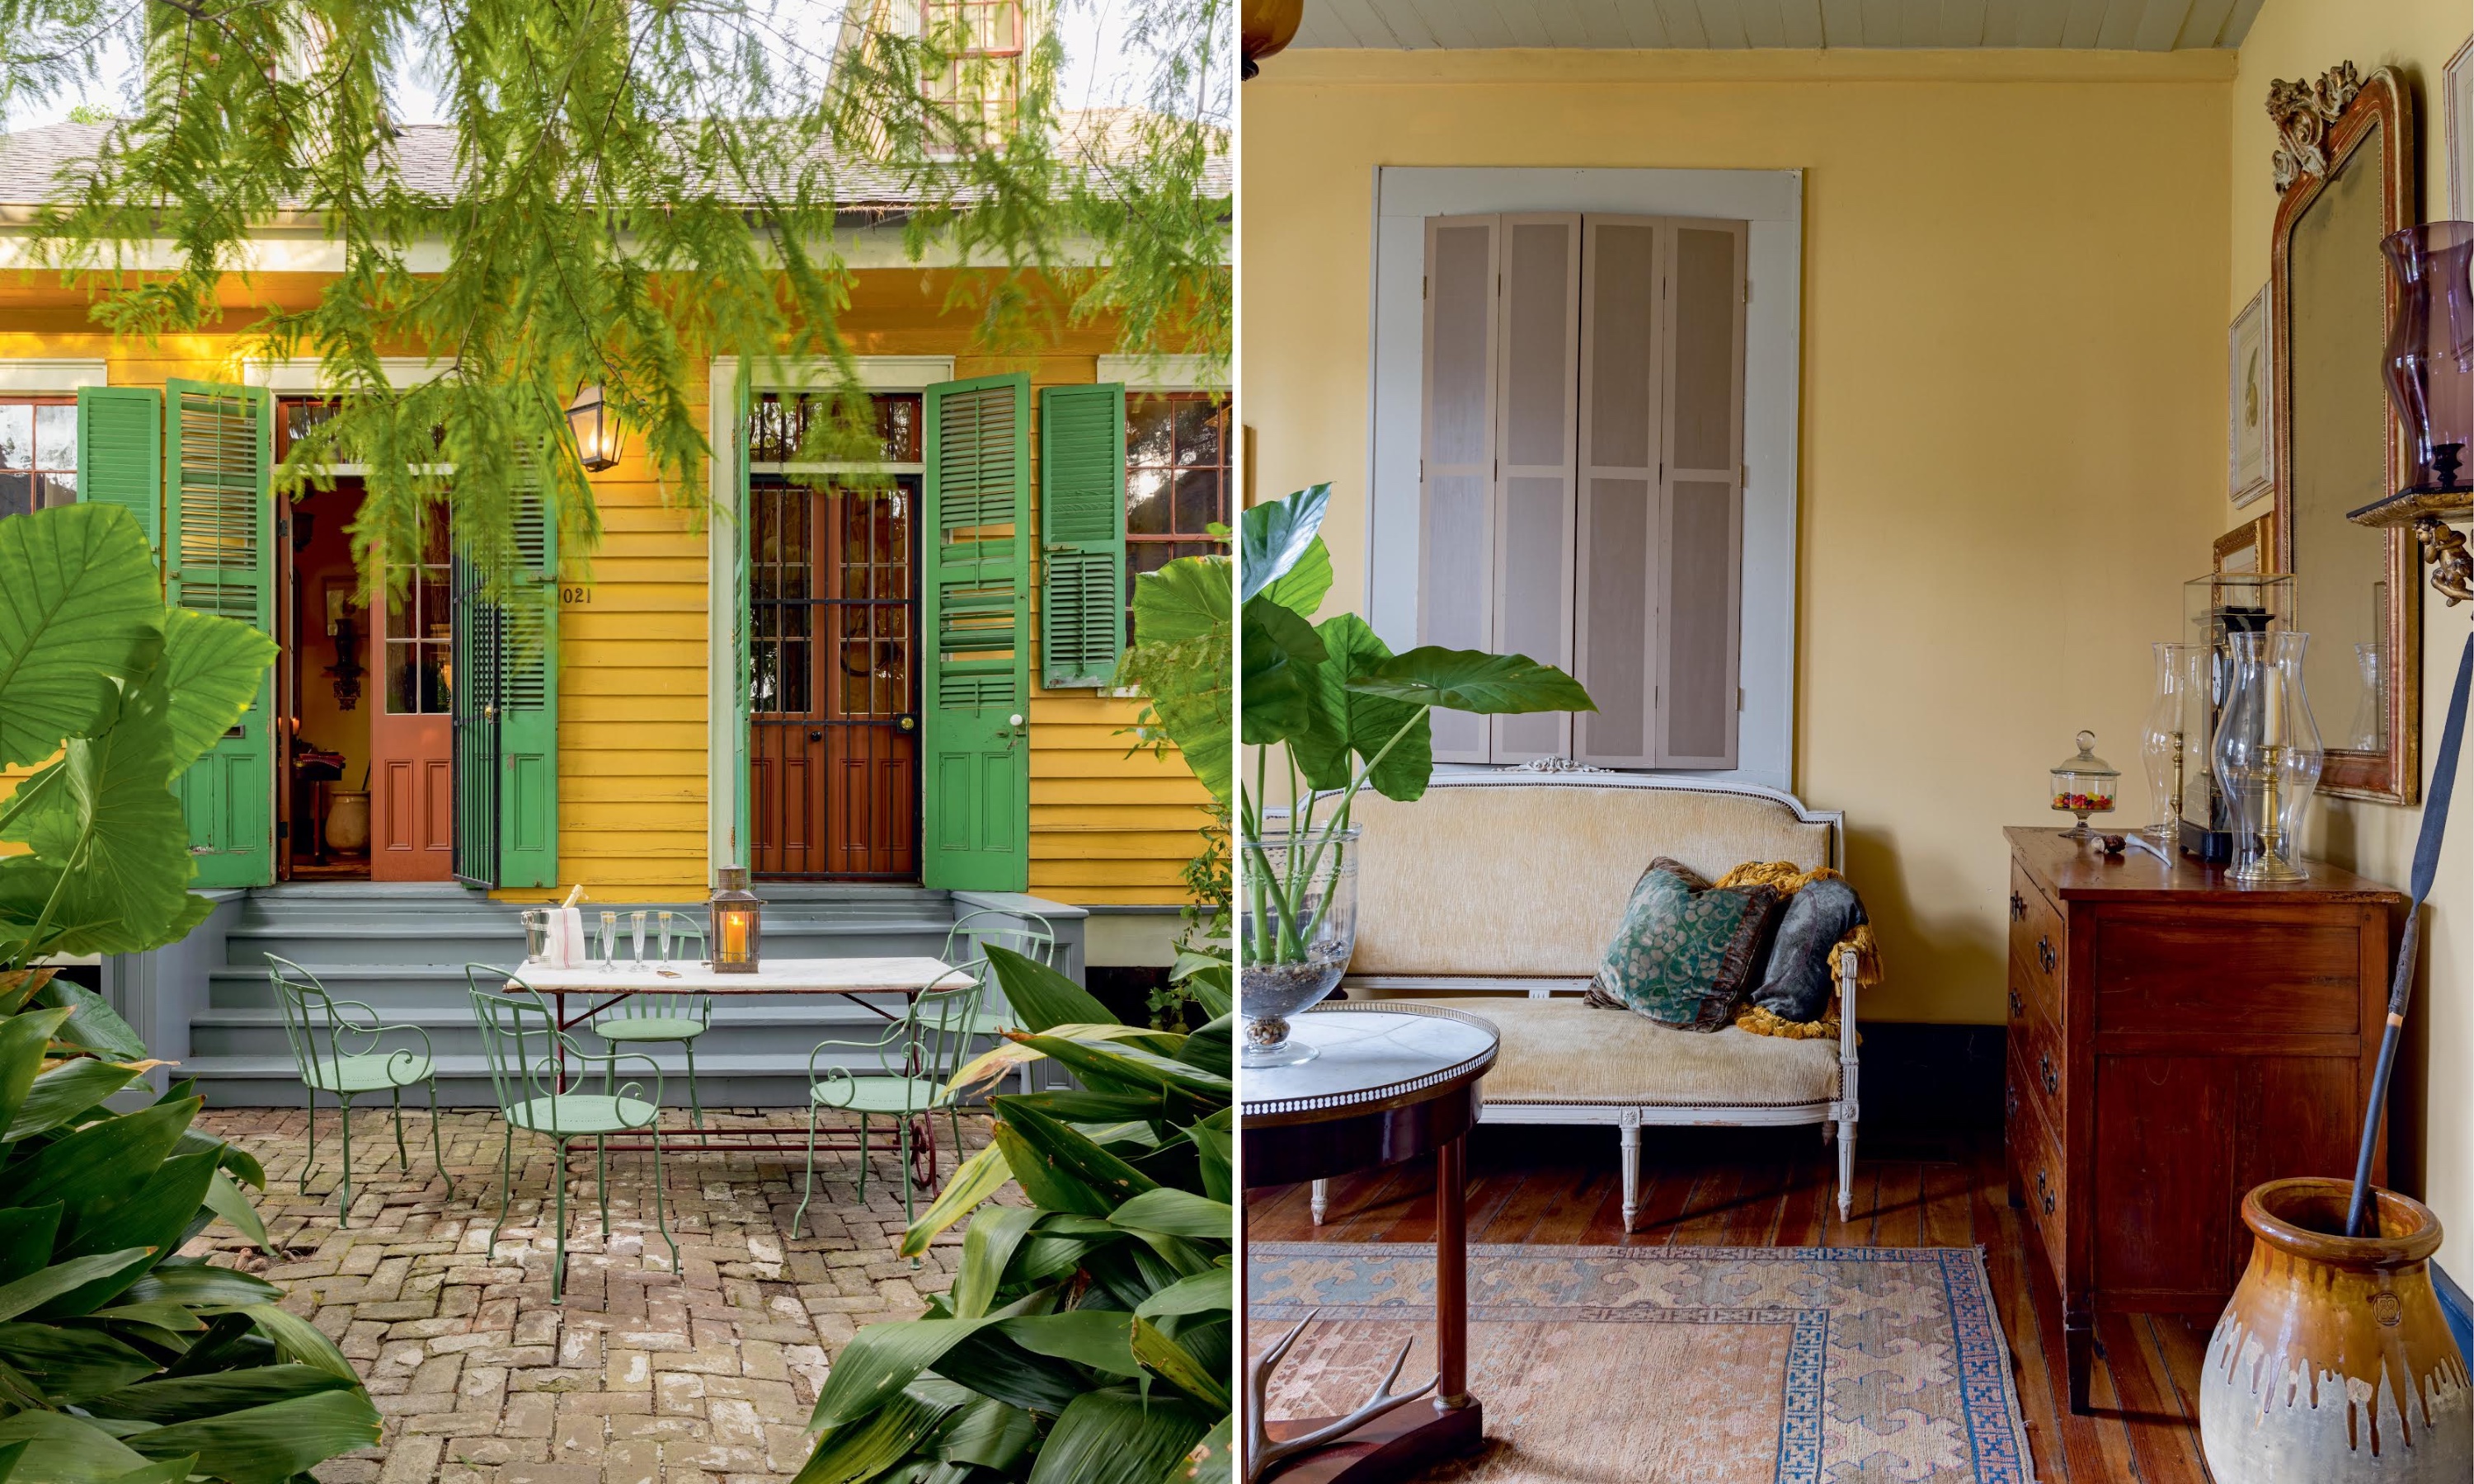 A collage of two images: an exterior home with yellow siding and bright green shutters; a pale yellow living room with brown shutters